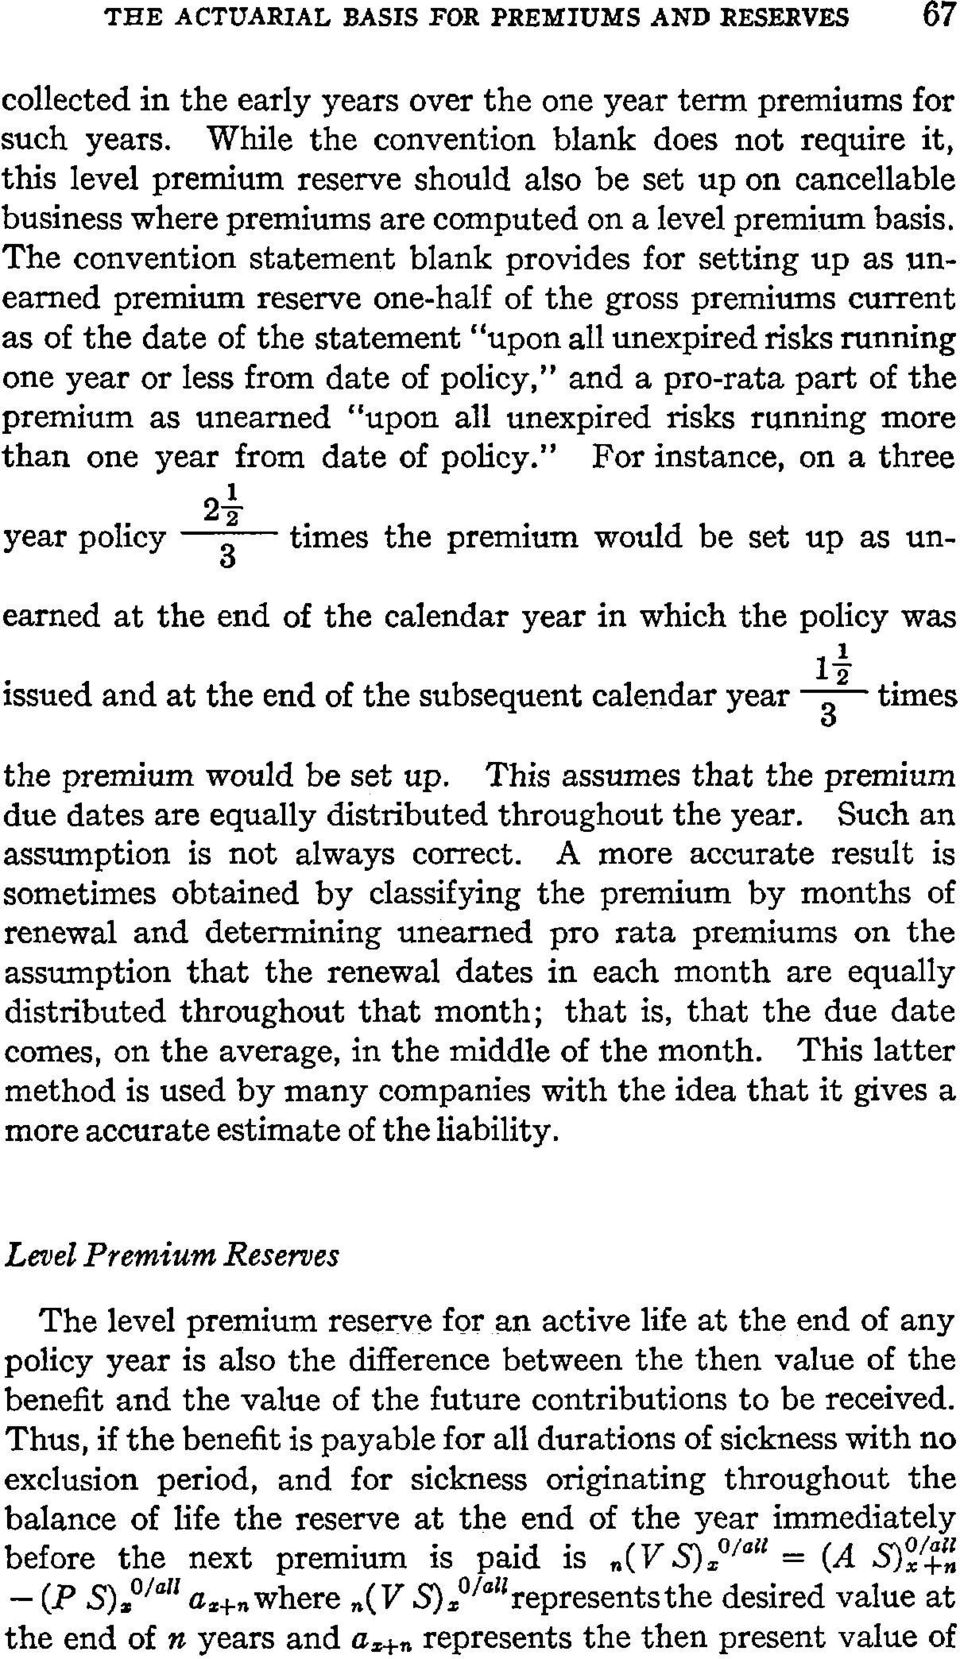 The convention statement blank provides for setting up as unearned premium reserve one-half of the gross premiums current as of the date of the statement "upon all unexpired risks running one year or